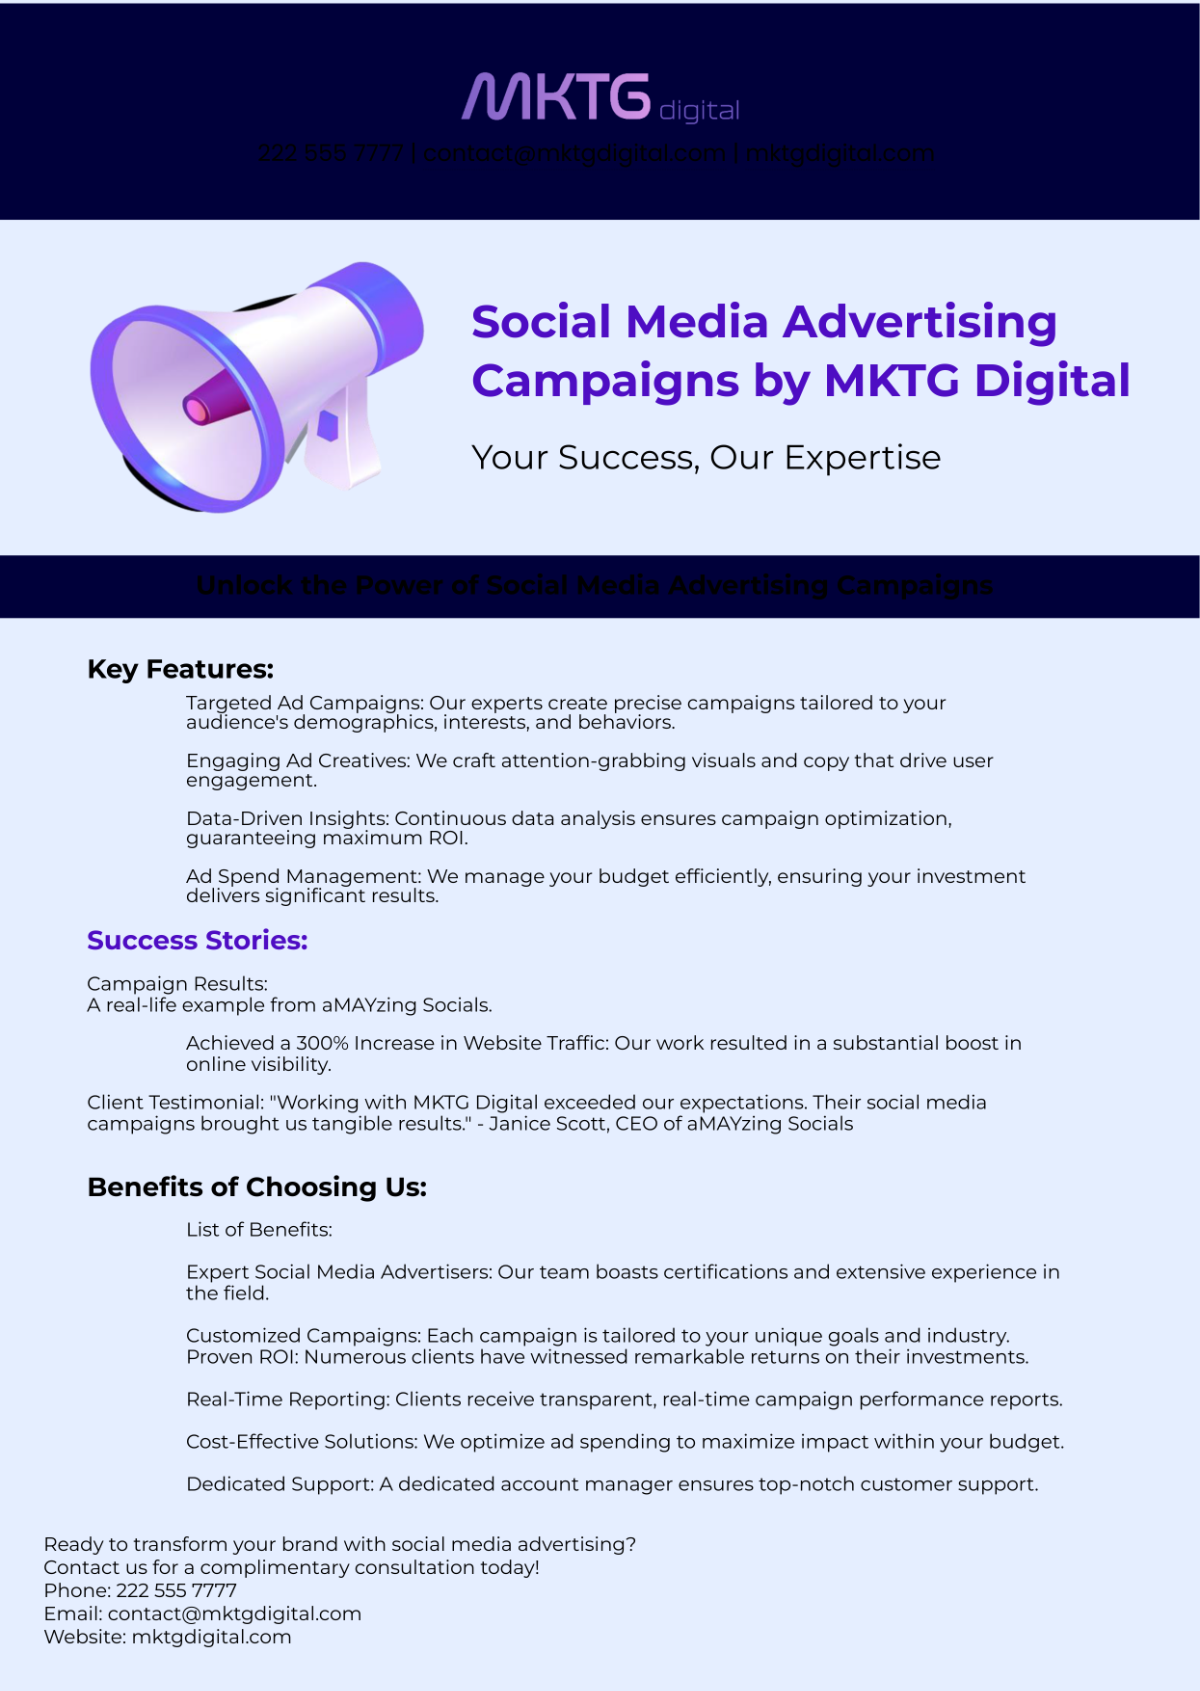 Free Digital Marketing Agency Product Infographic Template